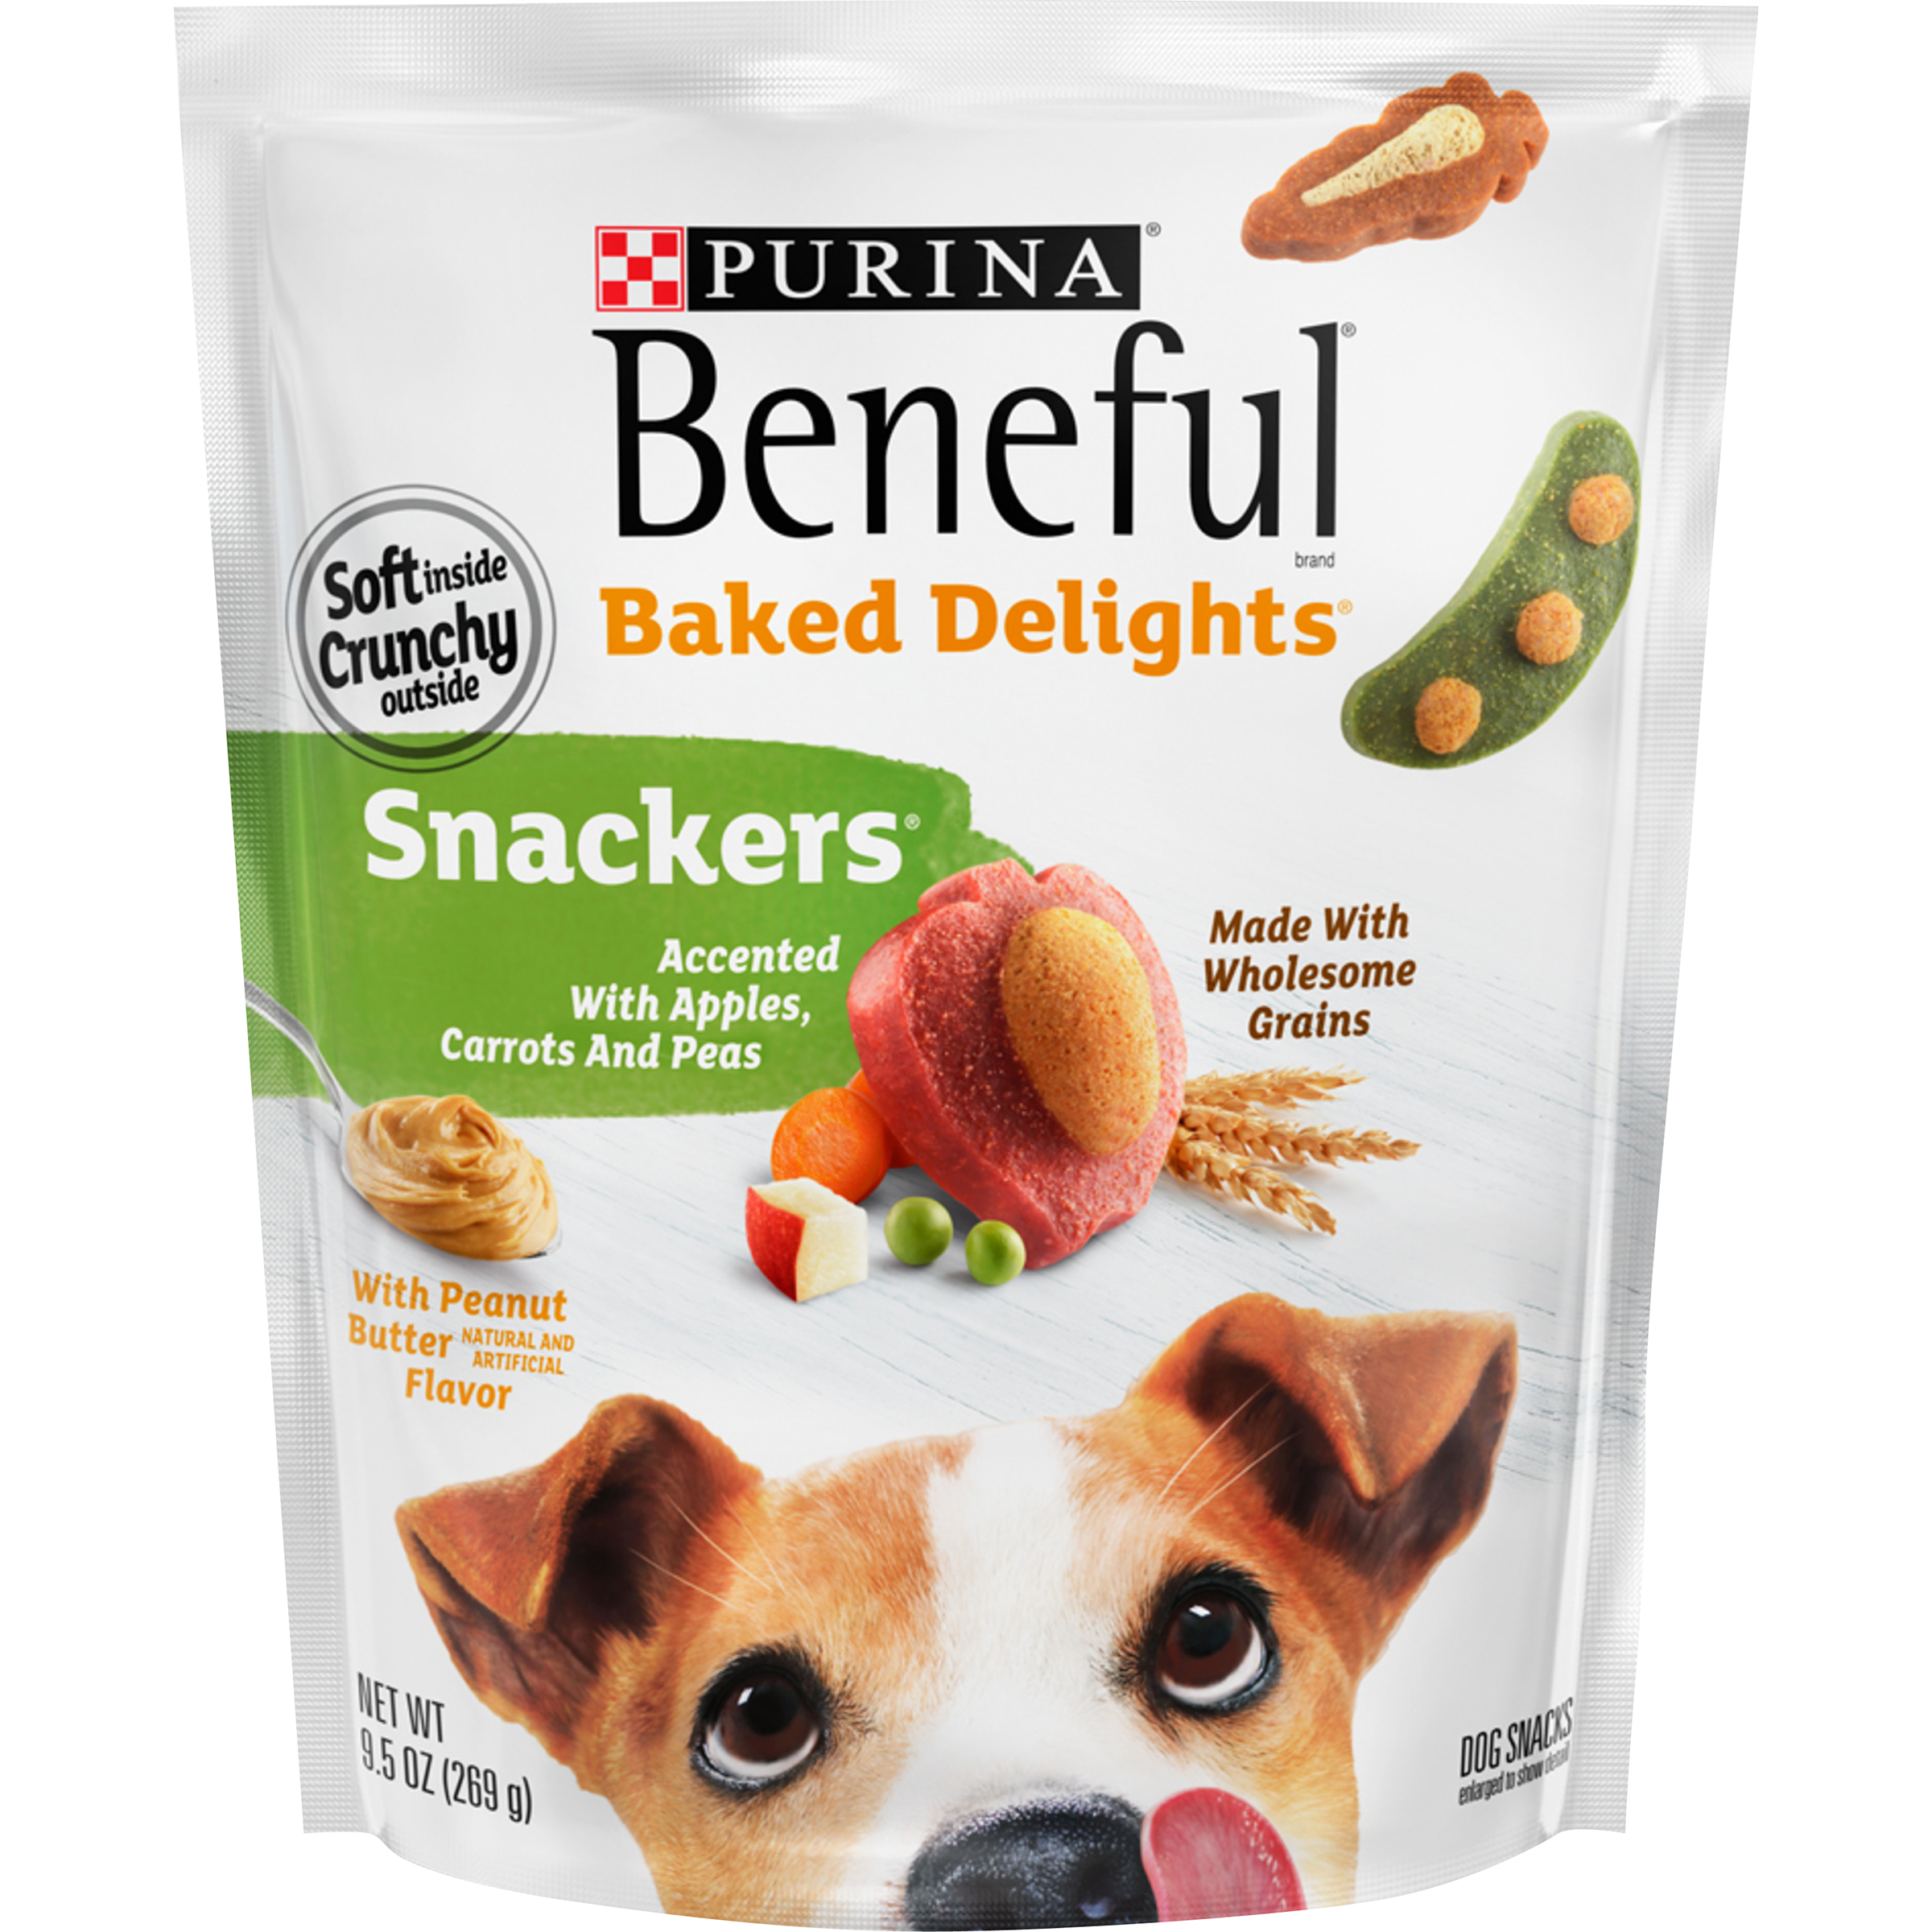 Beneful Baked Delights, Snackers, 9.5 Oz